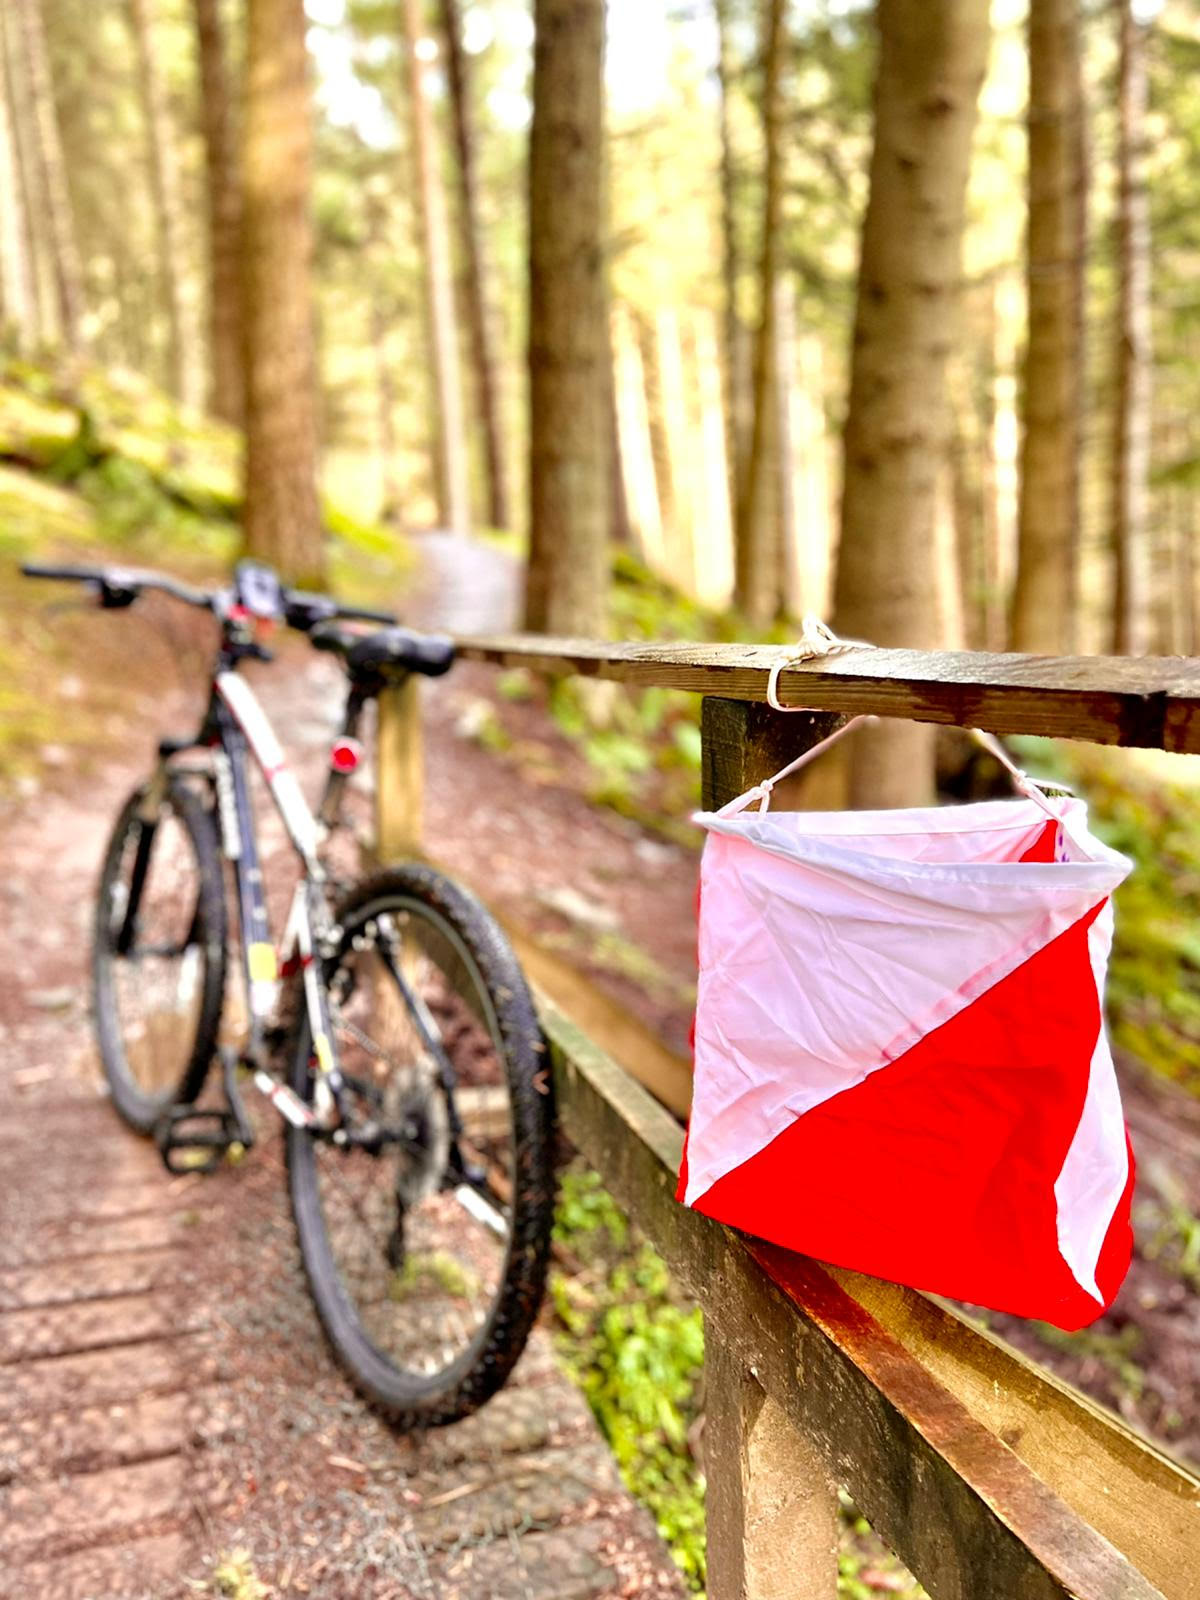 Bike against a bridge edge with a white and orange orienteering flag in the foreground